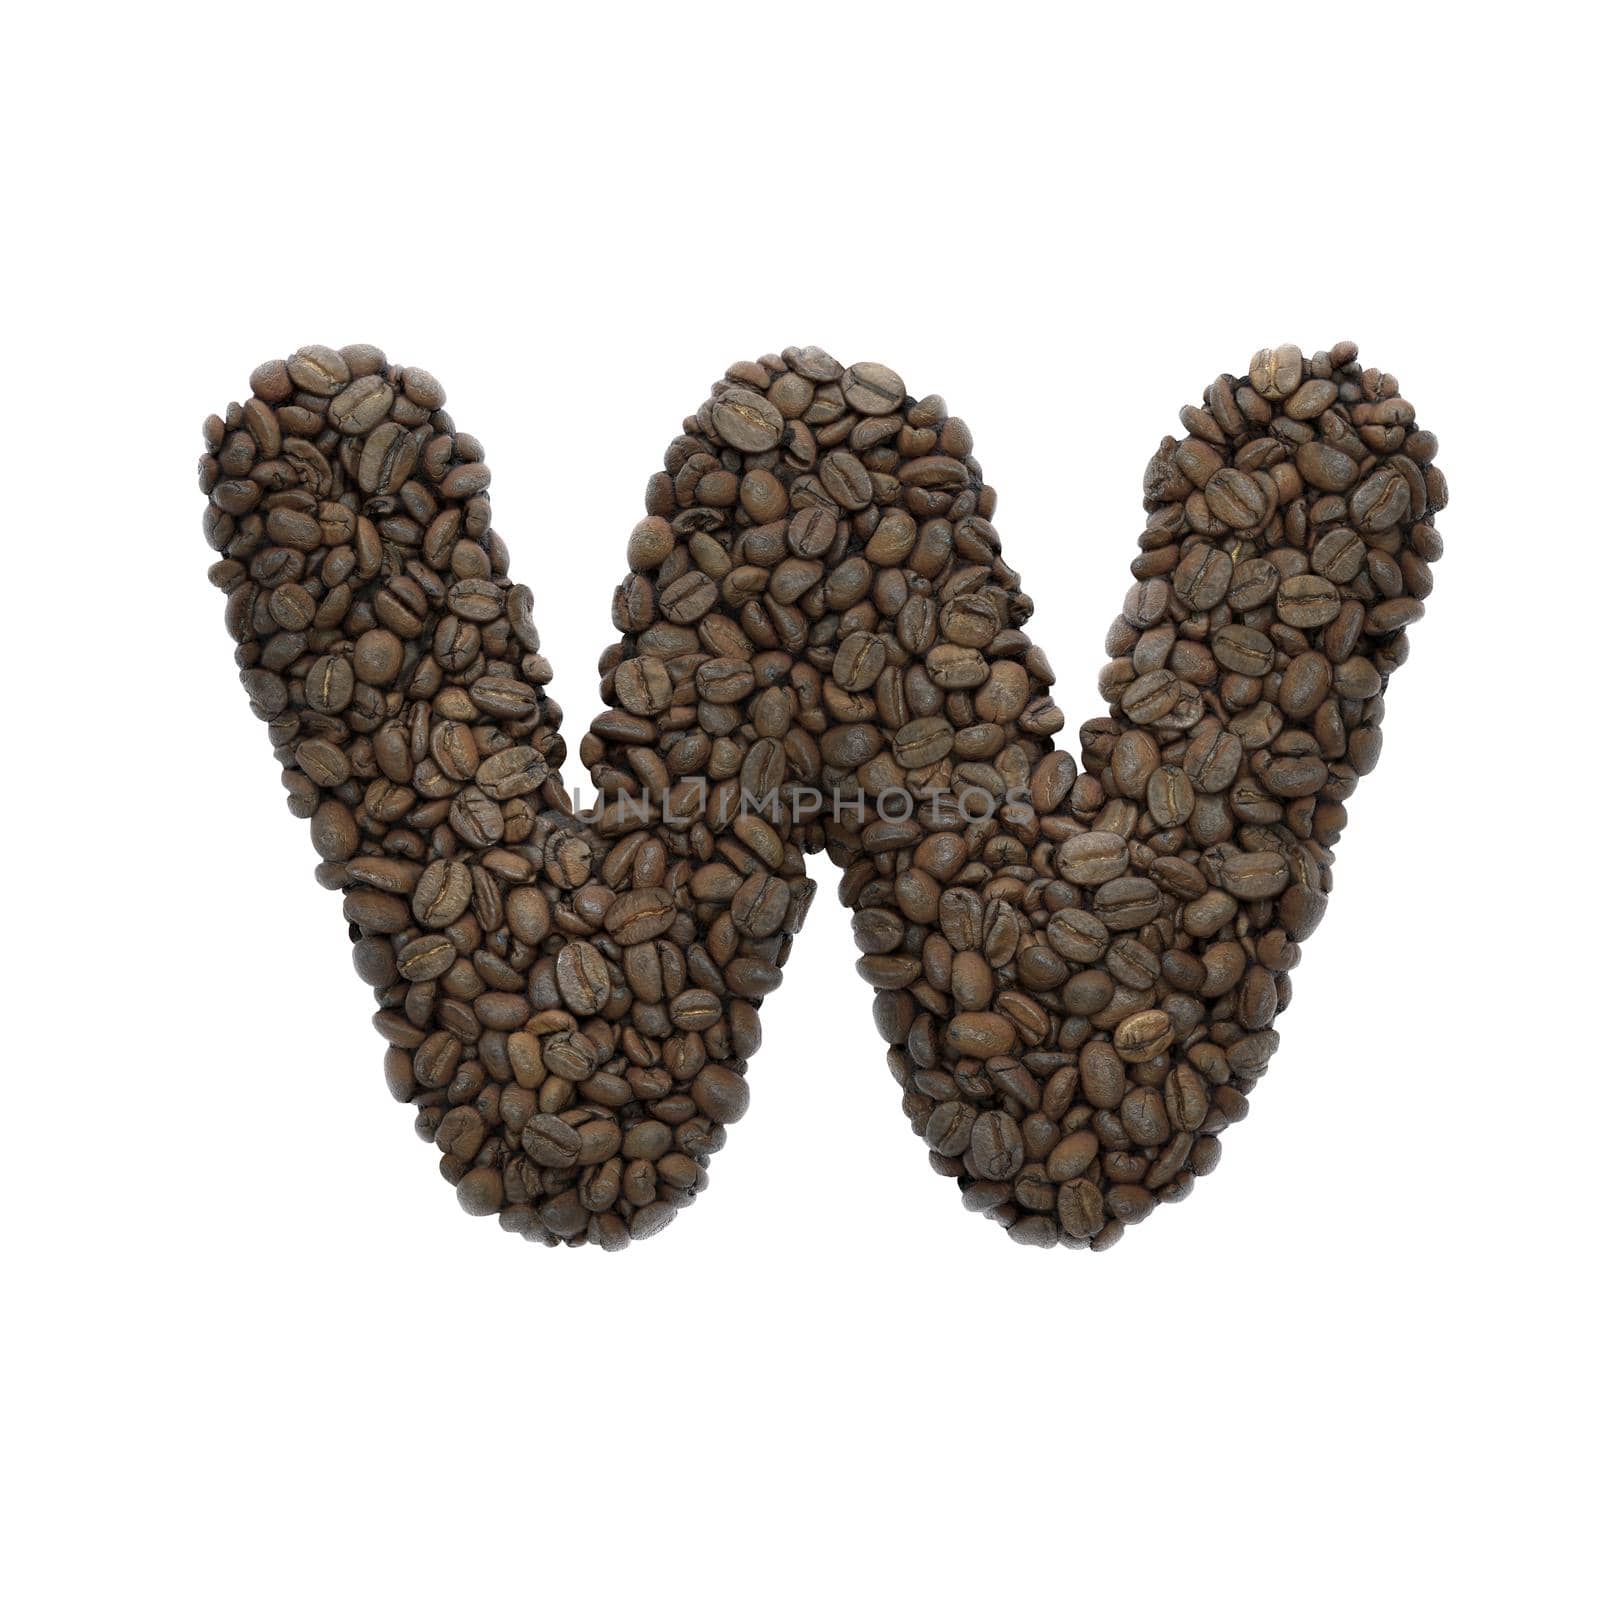 Coffee letter W - Lower-case 3d roasted beans font - Suitable for Coffee, energy or insomnia related subjects by chrisroll